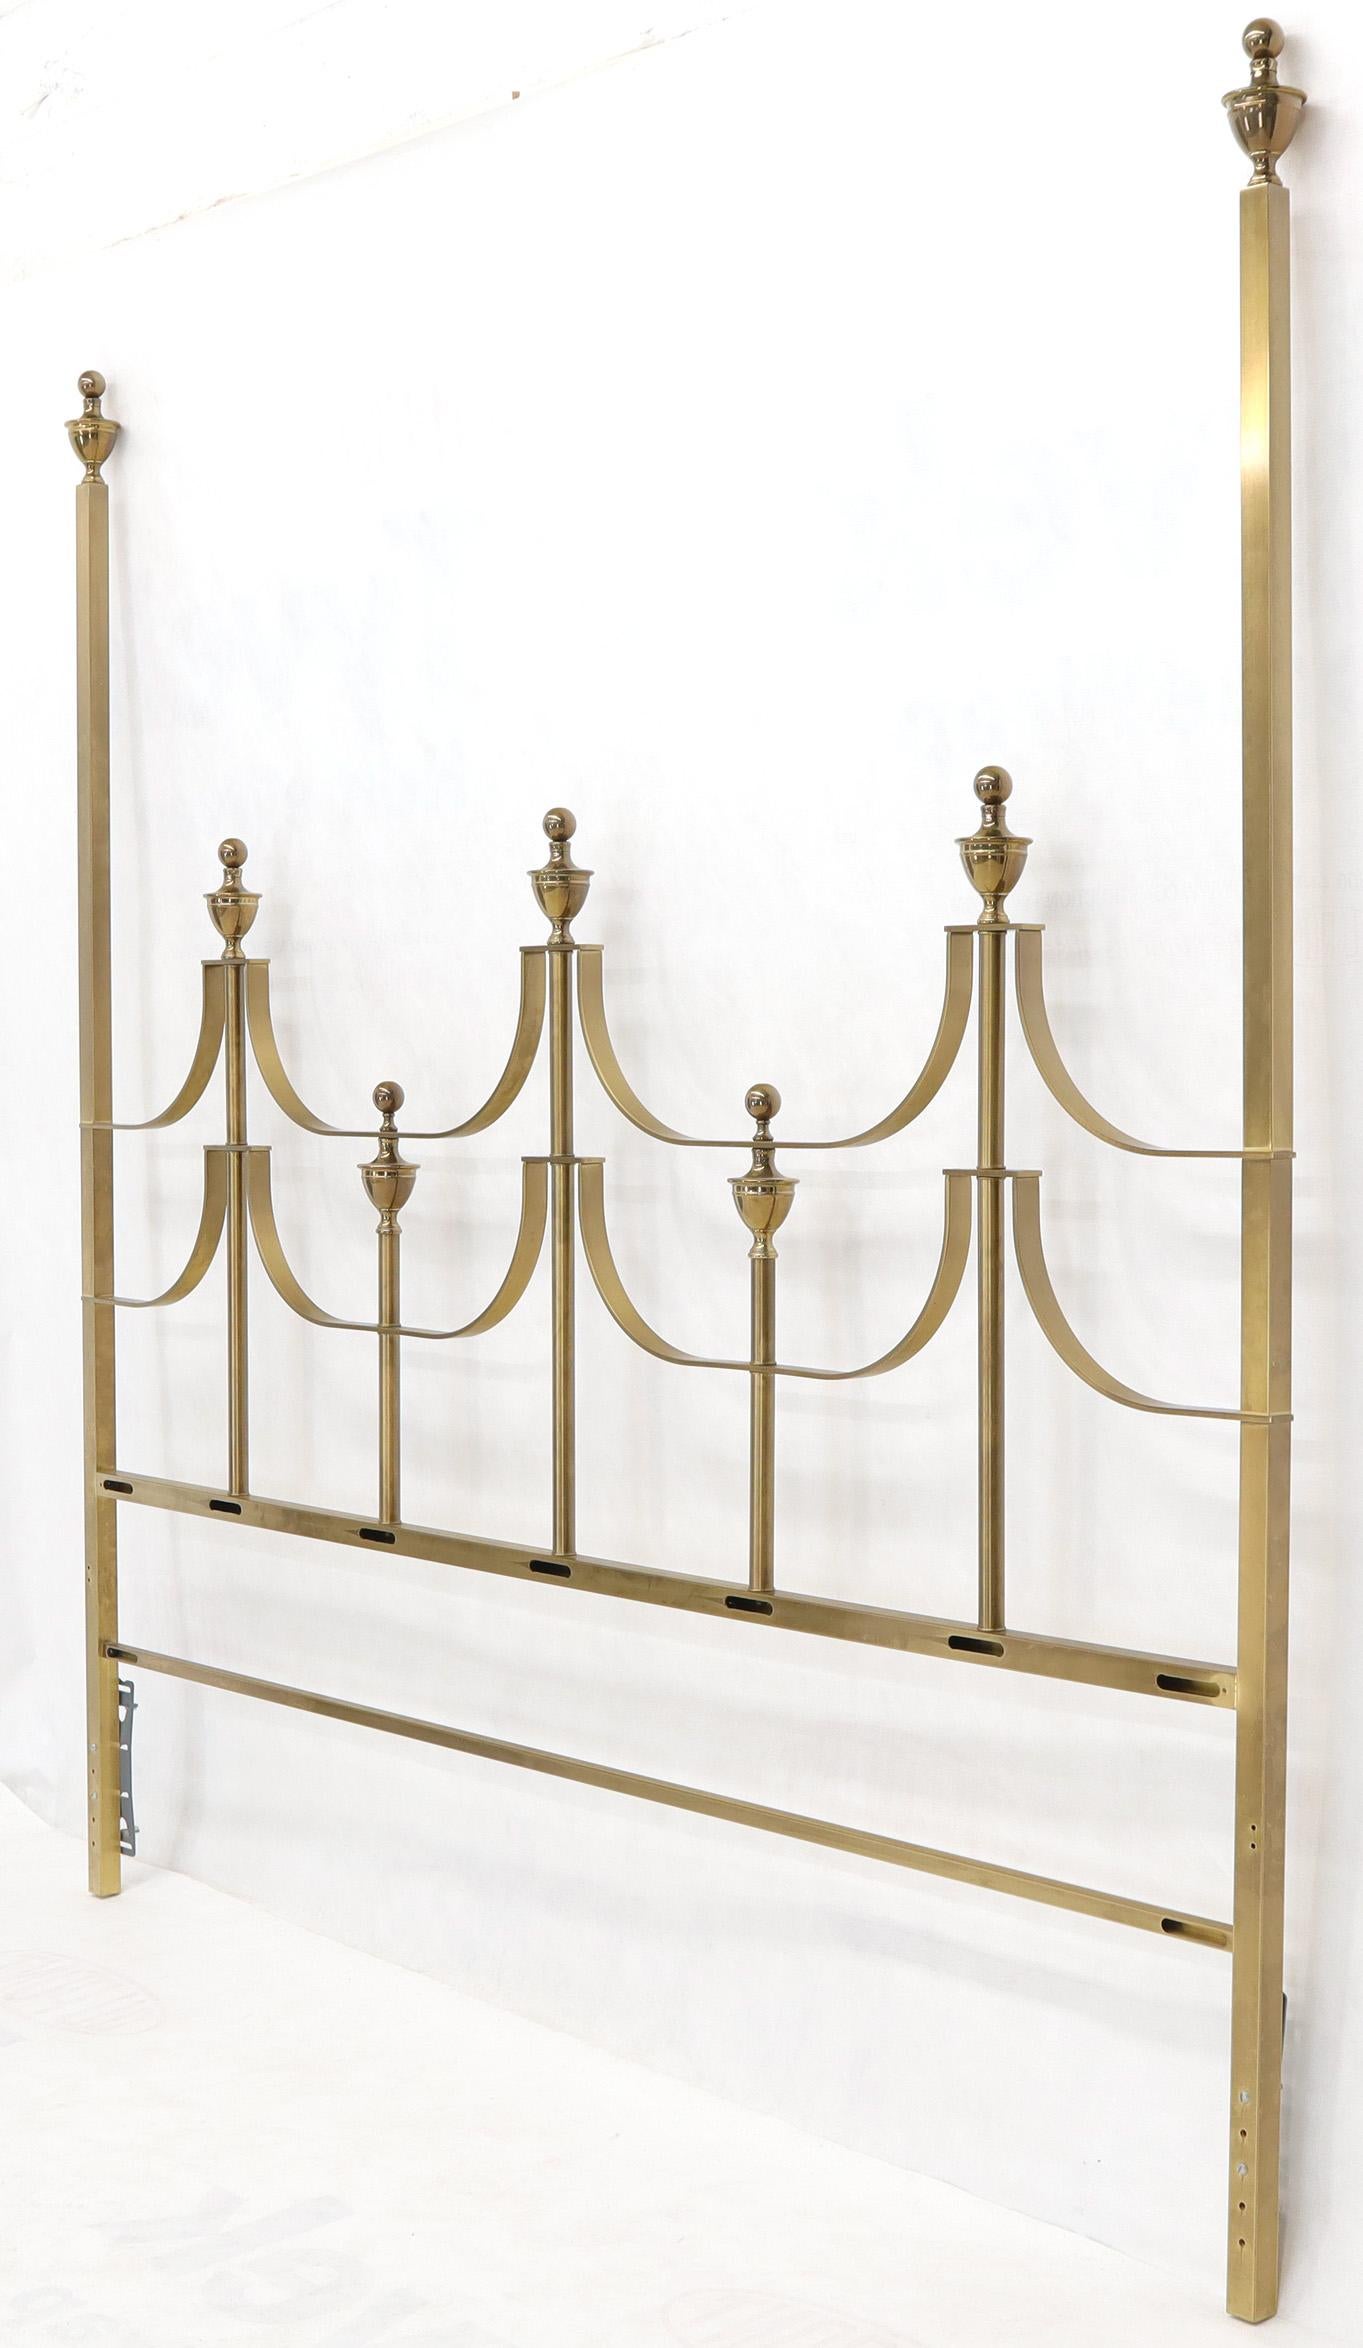 Solid Brass Mastercraft King Size Tall Headboard Bed For Sale 1